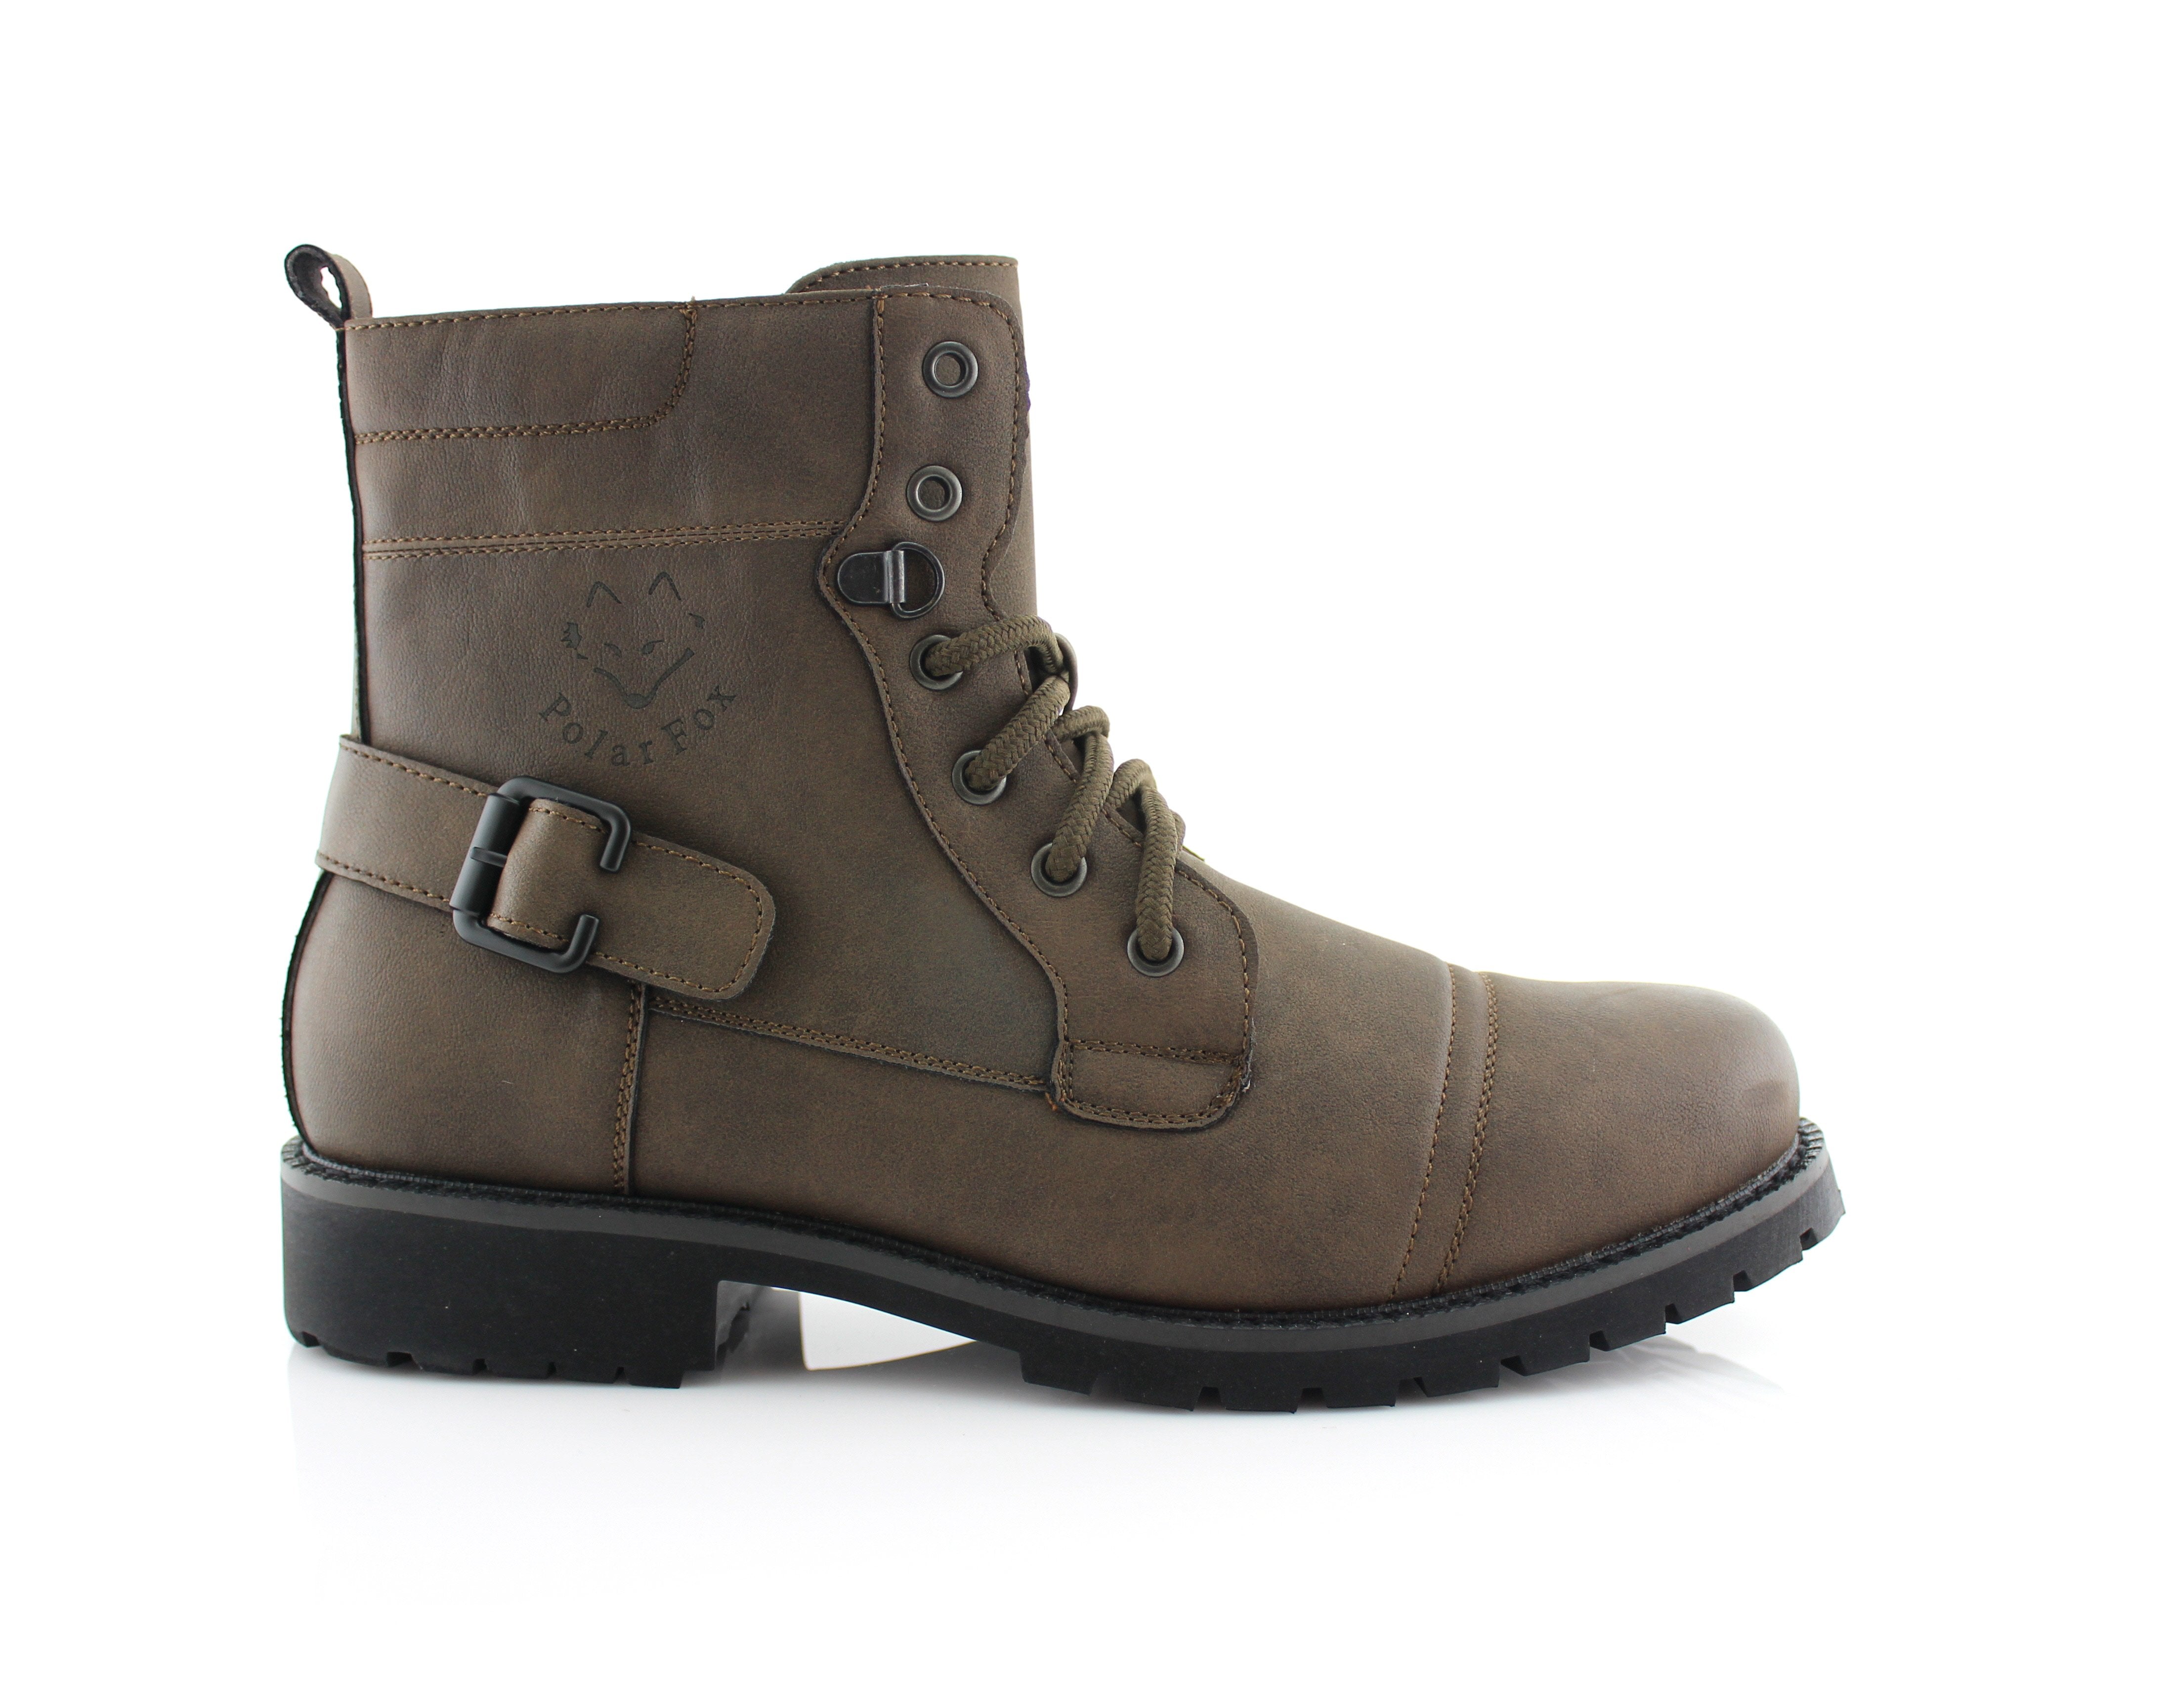 Rugged Inner Mesh Boots | Fabian by Polar Fox | Conal Footwear | Outer Side Angle View